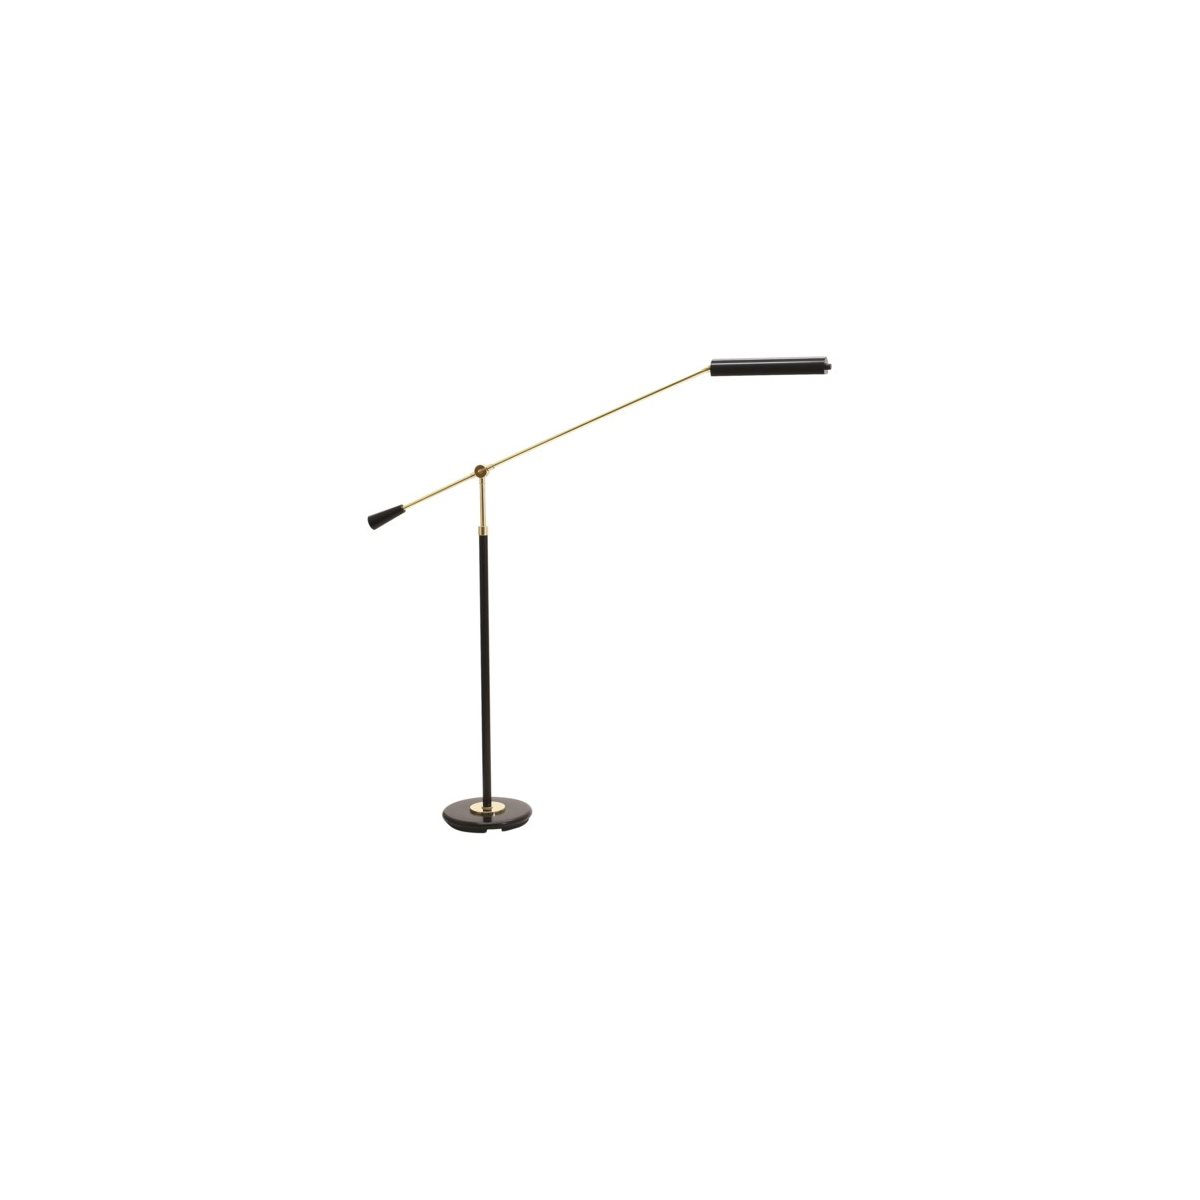 HOUSE OF TROY - PFLED-617 - Grand Piano Counter Balance LED Floor Lamp in Black with Polished Brass Accents